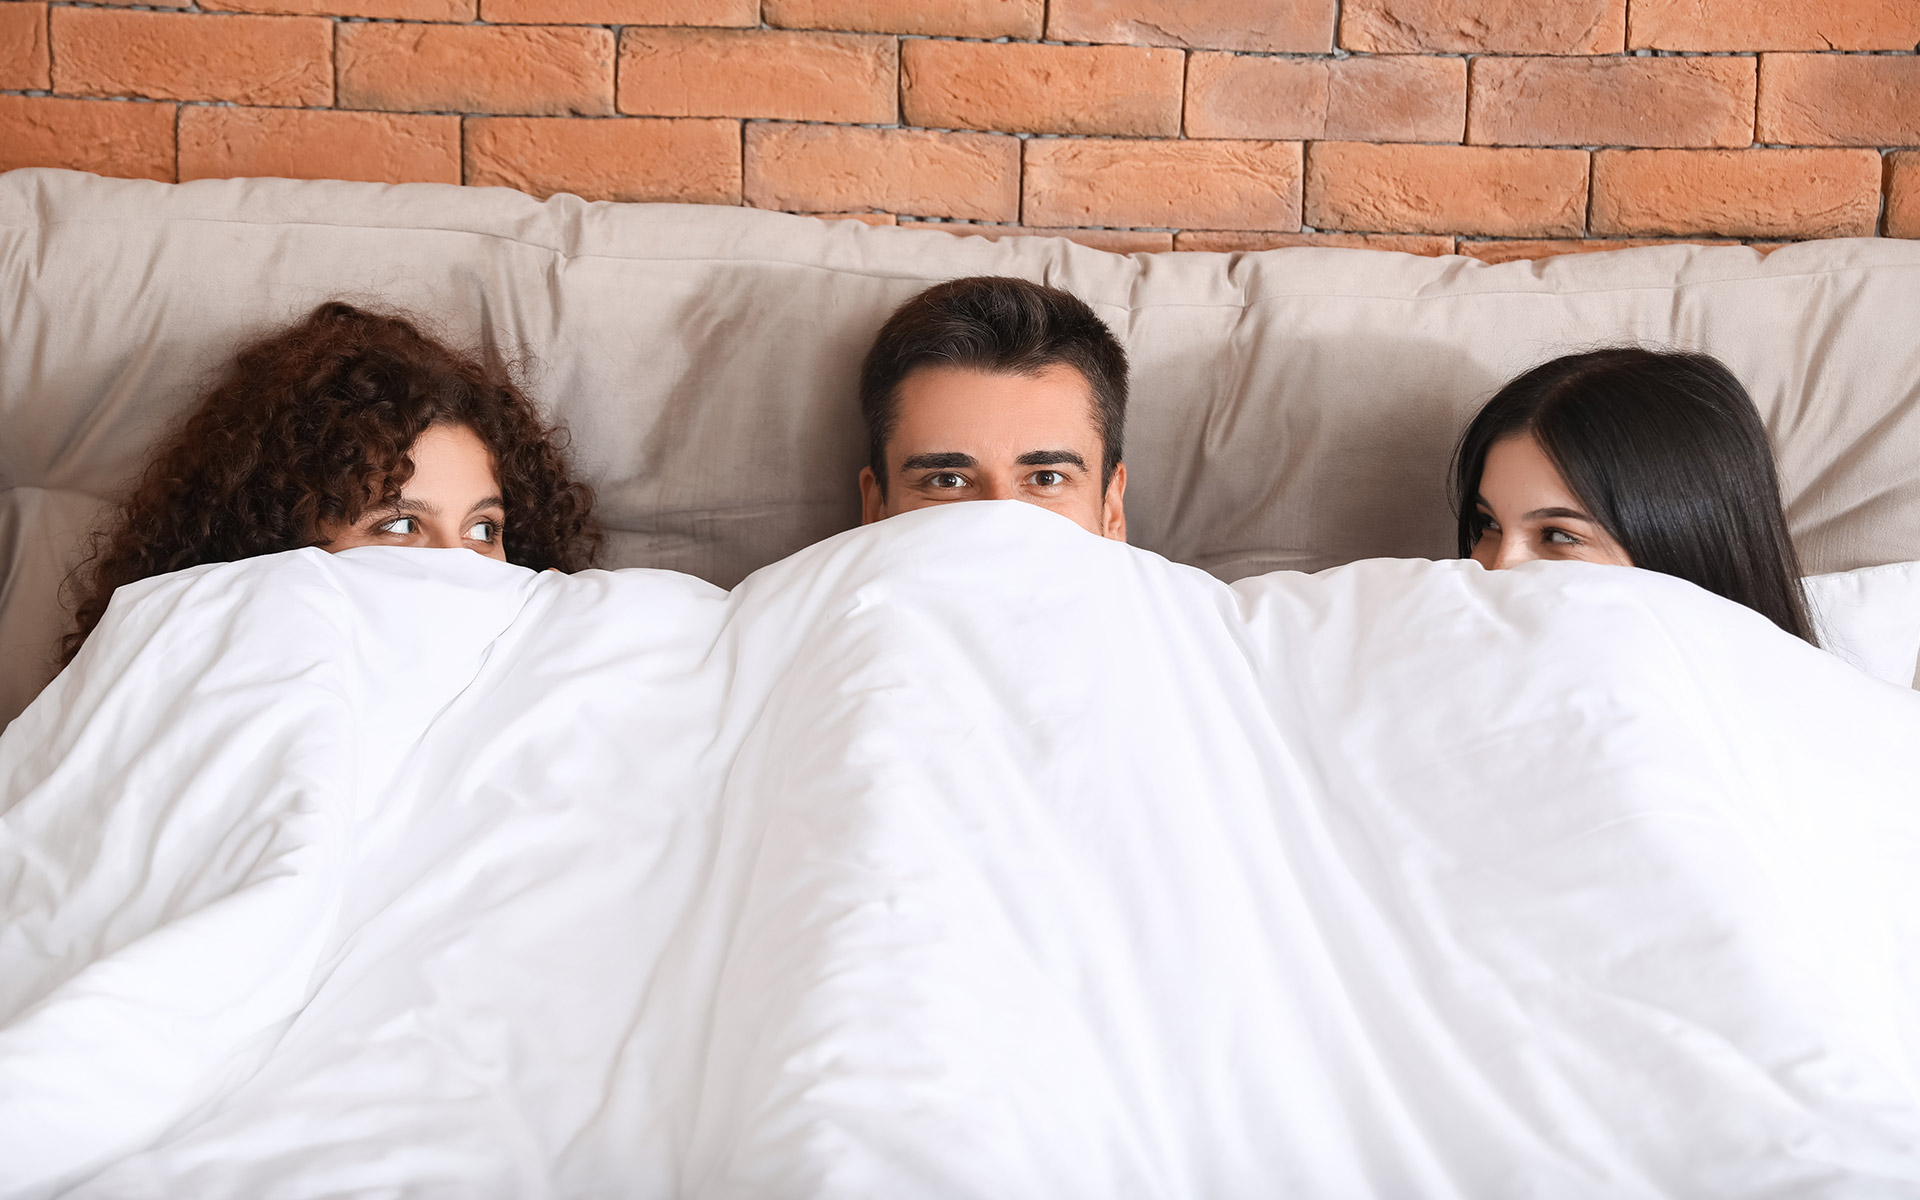 Brunette man in bed between two brunette women, all covering half their faces with the duvet and looking at each other.